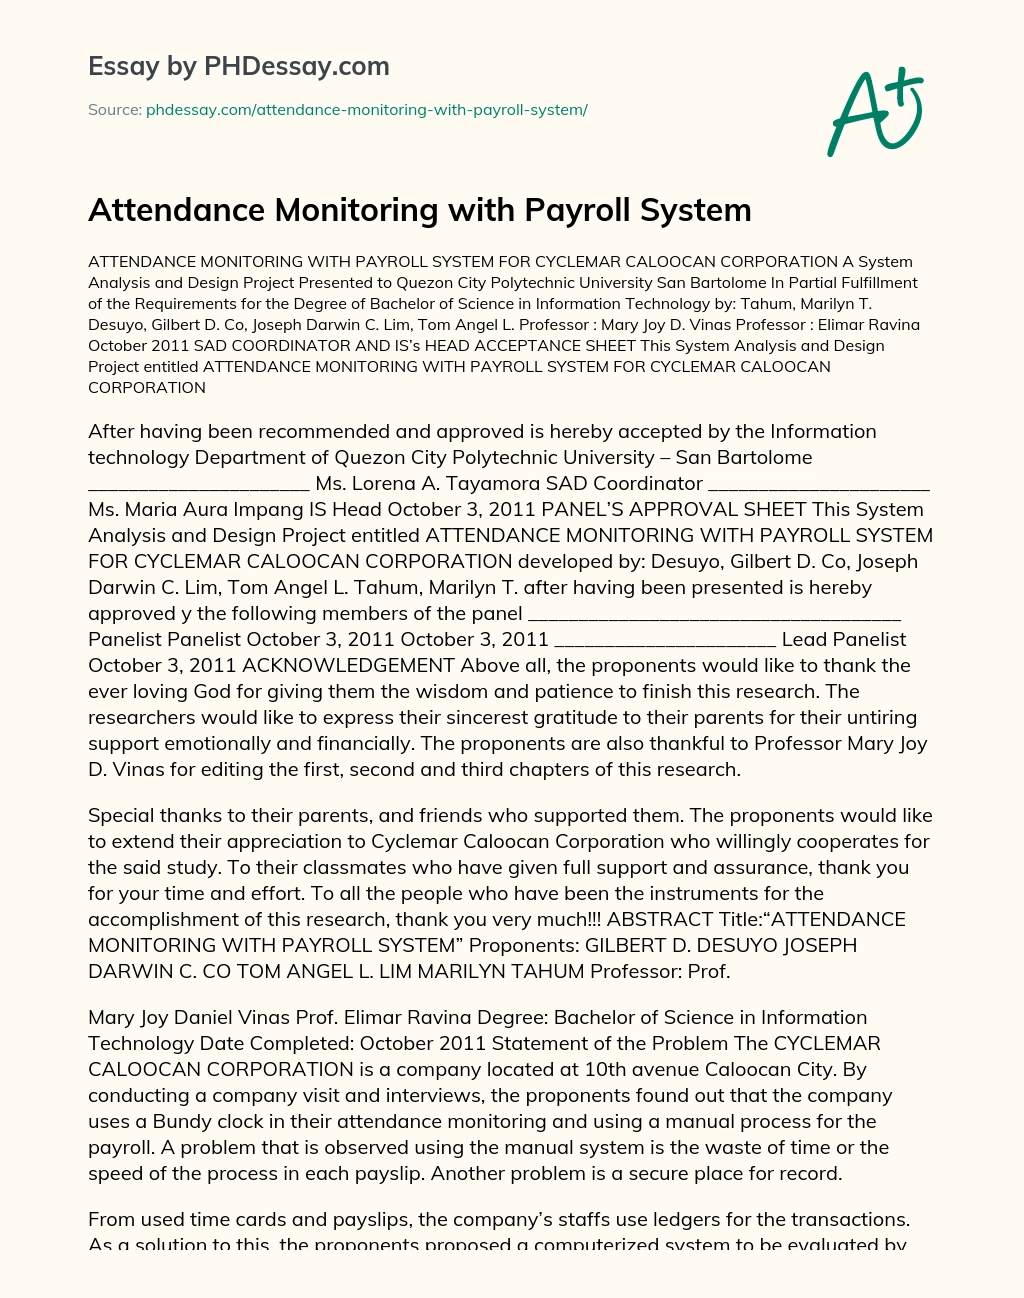 thesis about attendance monitoring system